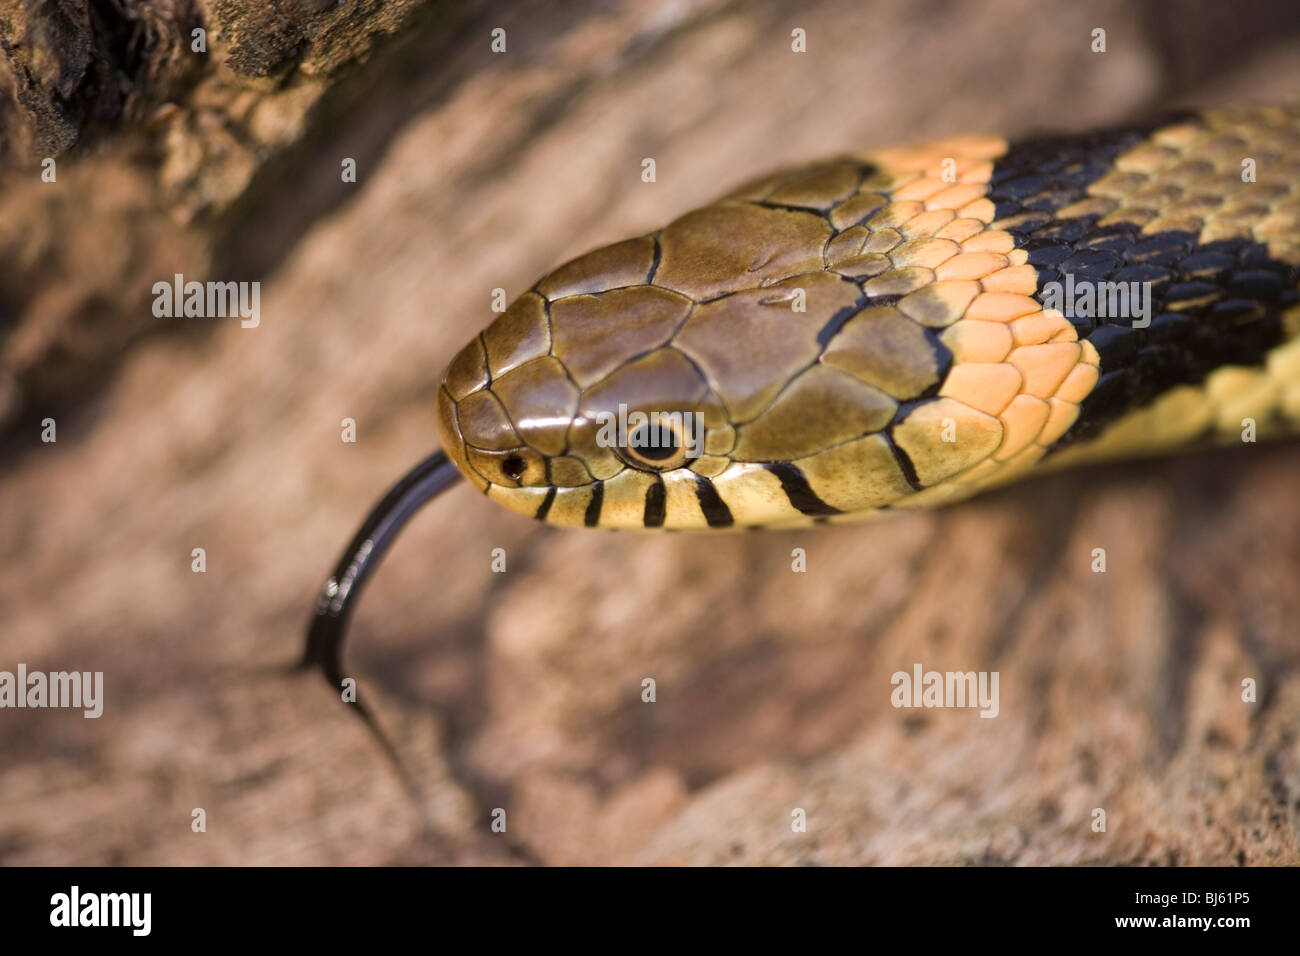 Grass Snake (Natrix natrix helvetica). Head showing identification feature of yellow-orange collar behind the head. Stock Photo